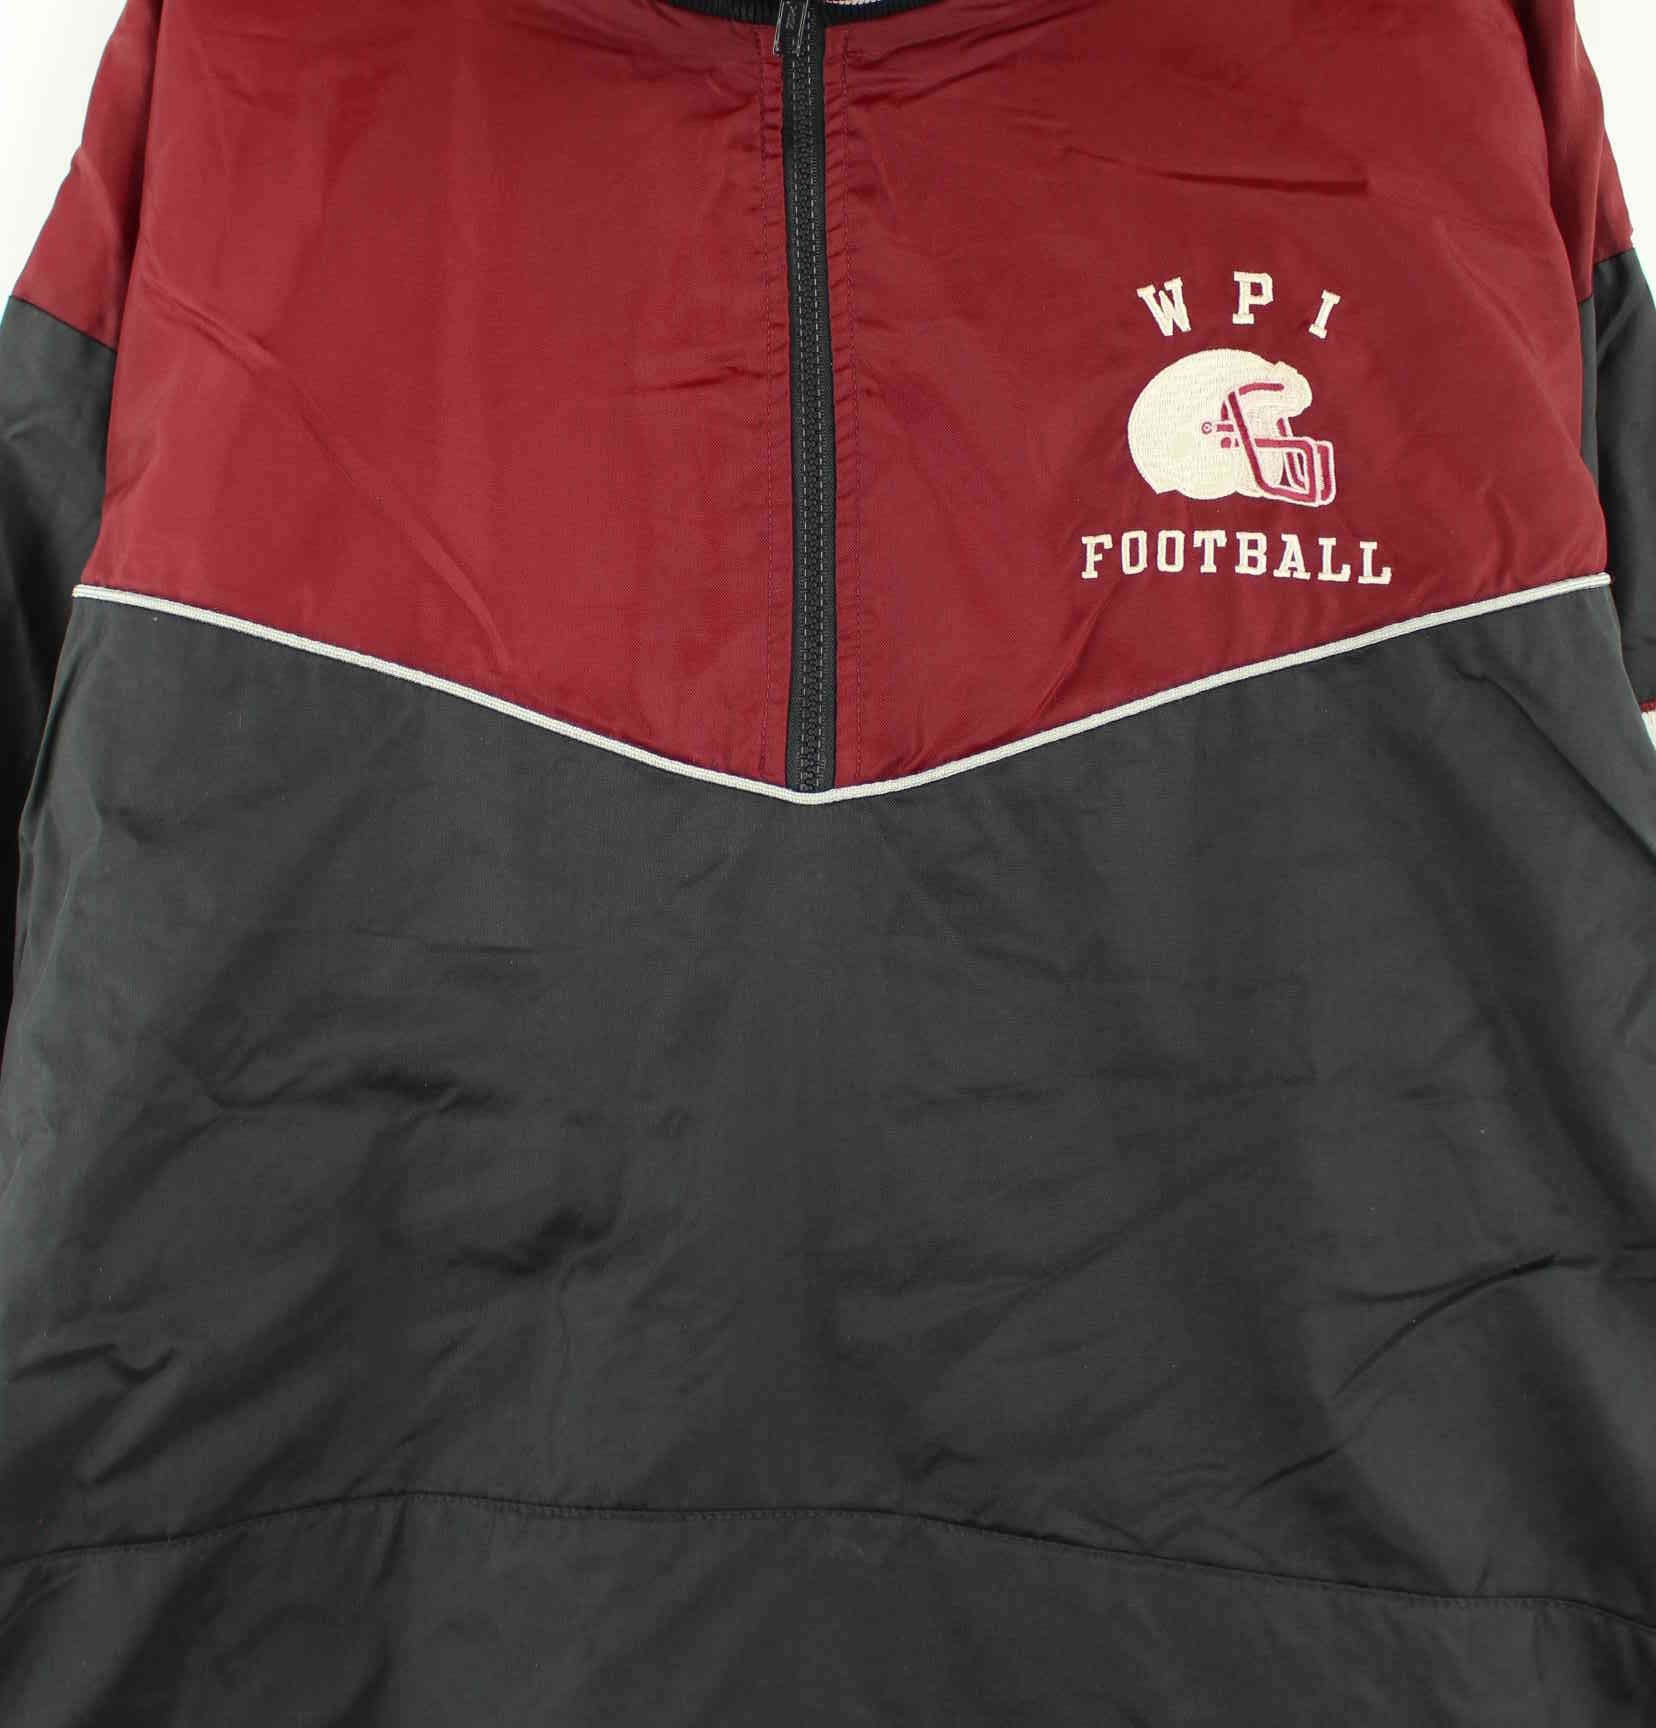 Vintage 90s Embroidered Football Coach Jacke Rot XL (detail image 1)